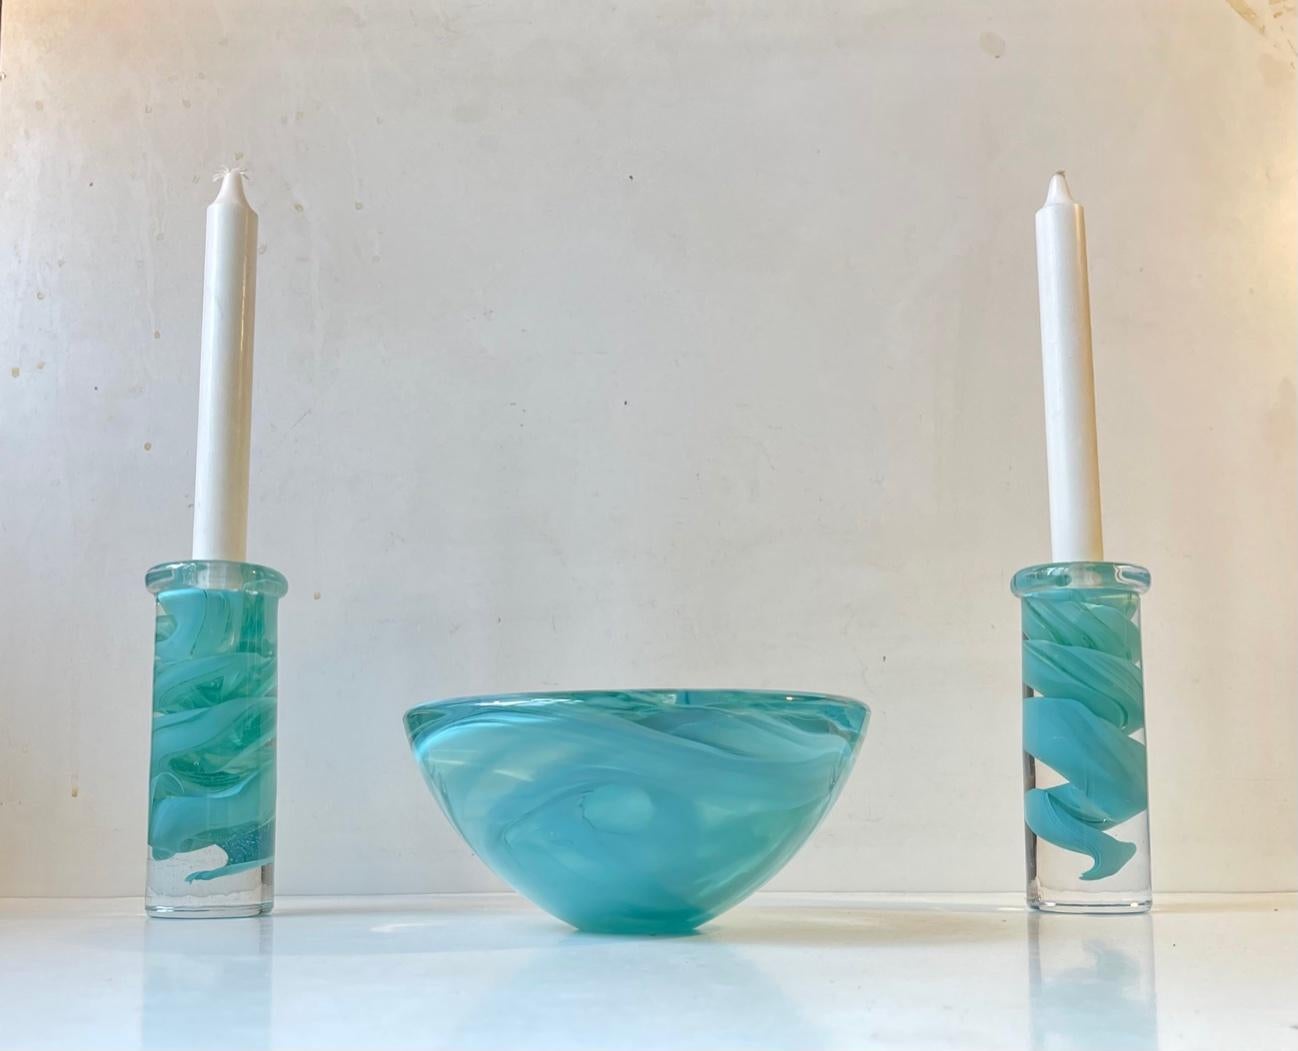 Thick and heavy conical art glass bow and two matching candlesticks from Kosta Boda in Sweden. Designed by Anna Ehrner in the mid 1980s. The technique is called Atoll and it features mint/turqouise swirl-work to the inside the clear glass. Original